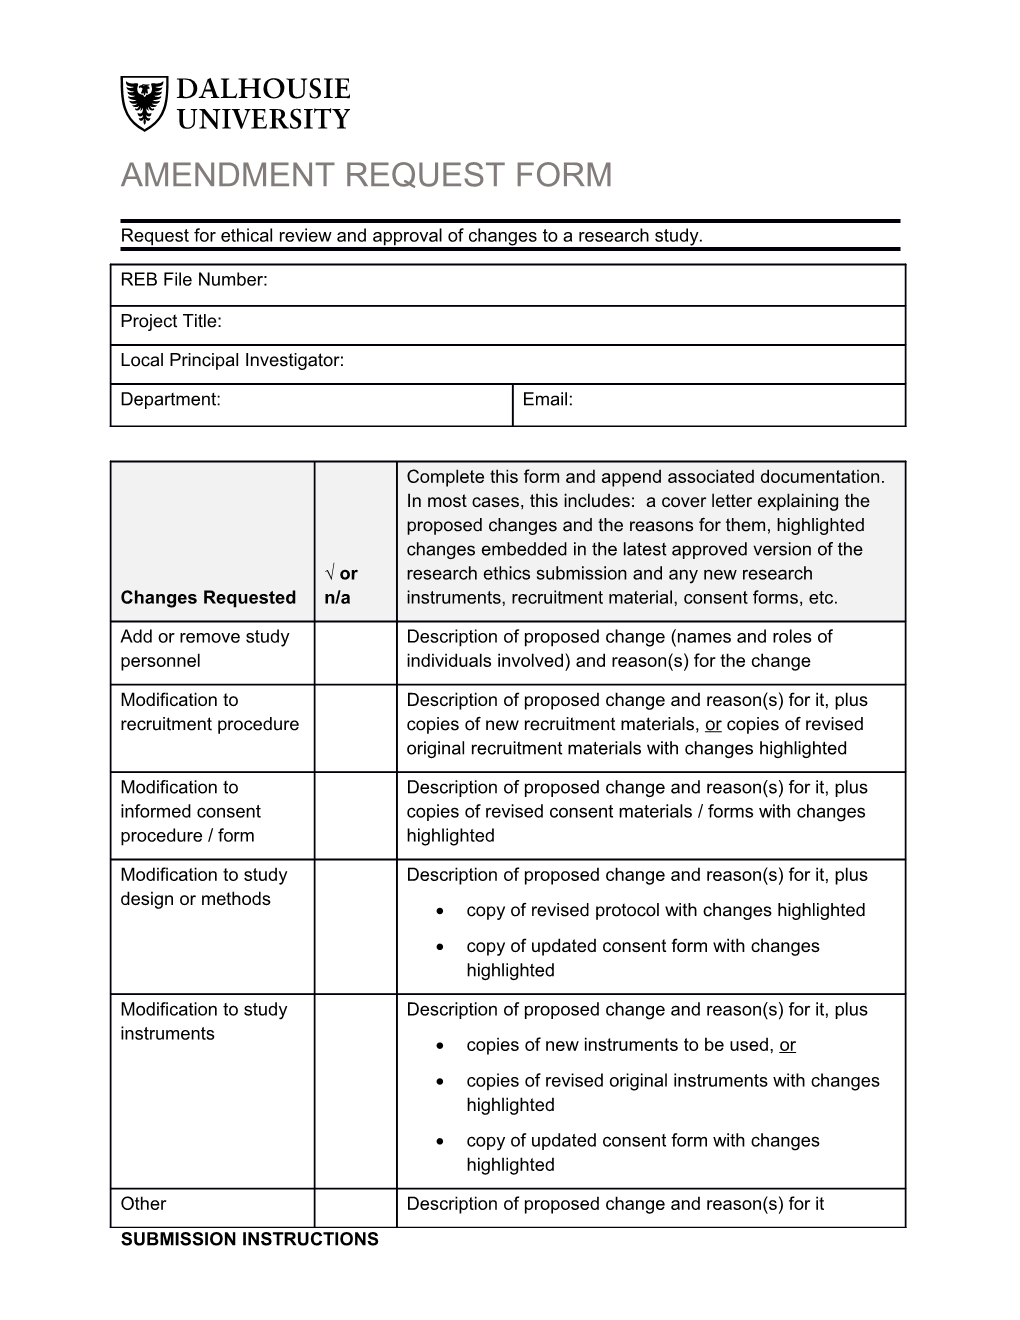 Request for Ethics Approval of Amendment to an Approved Project